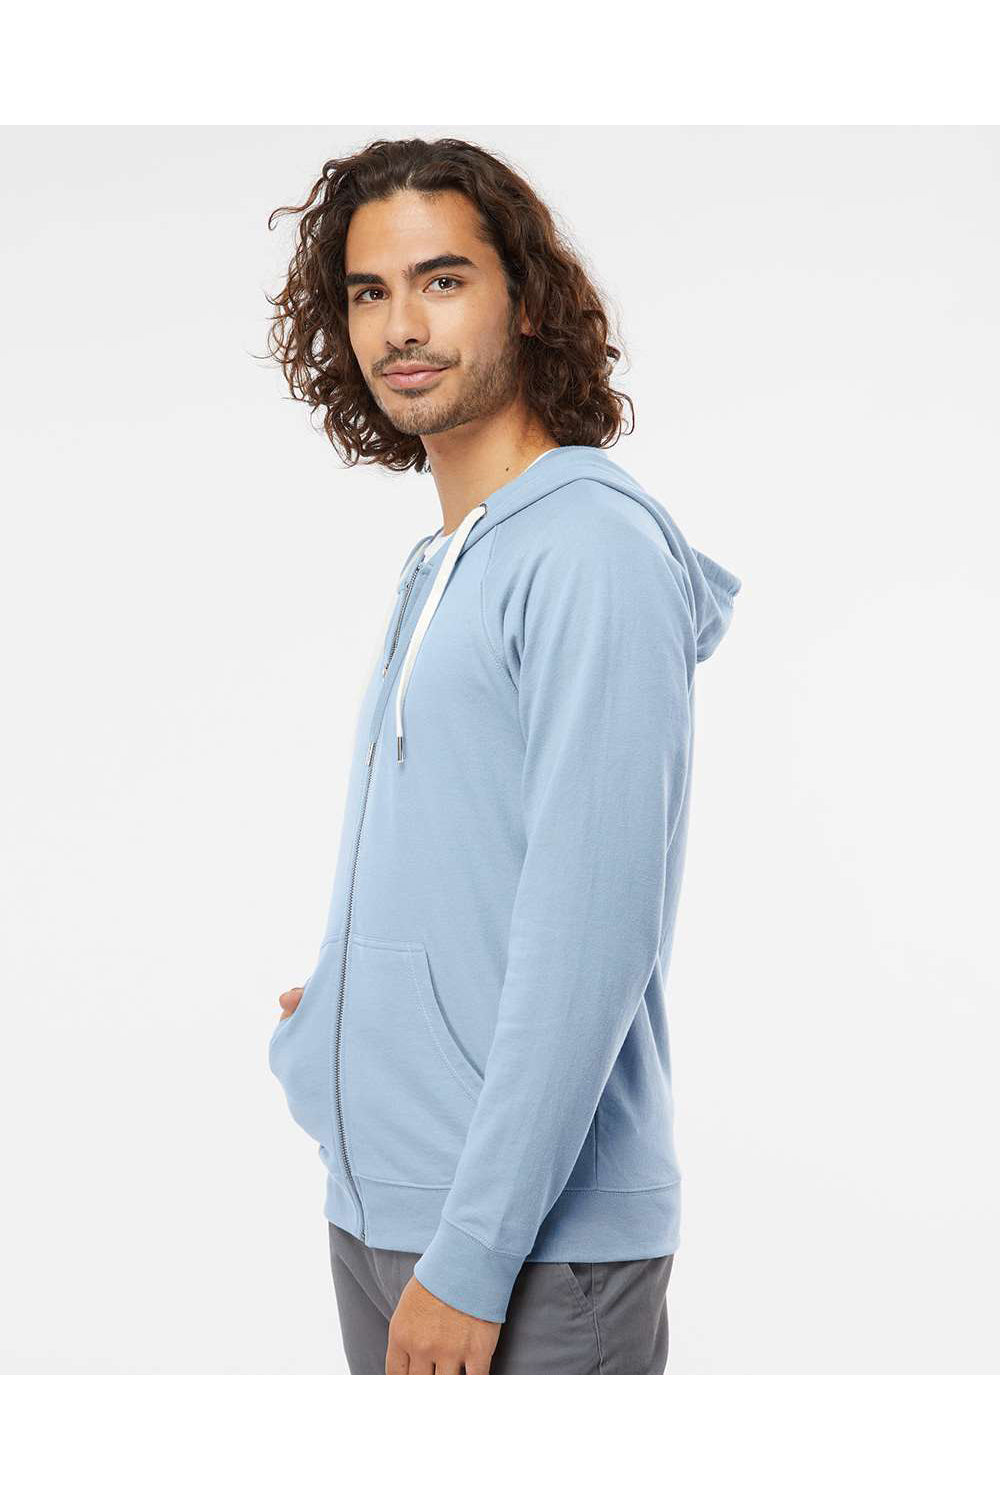 Independent Trading Co. SS1000Z Mens Icon Loopback Terry Full Zip Hooded Sweatshirt Hoodie Misty Blue Model Side